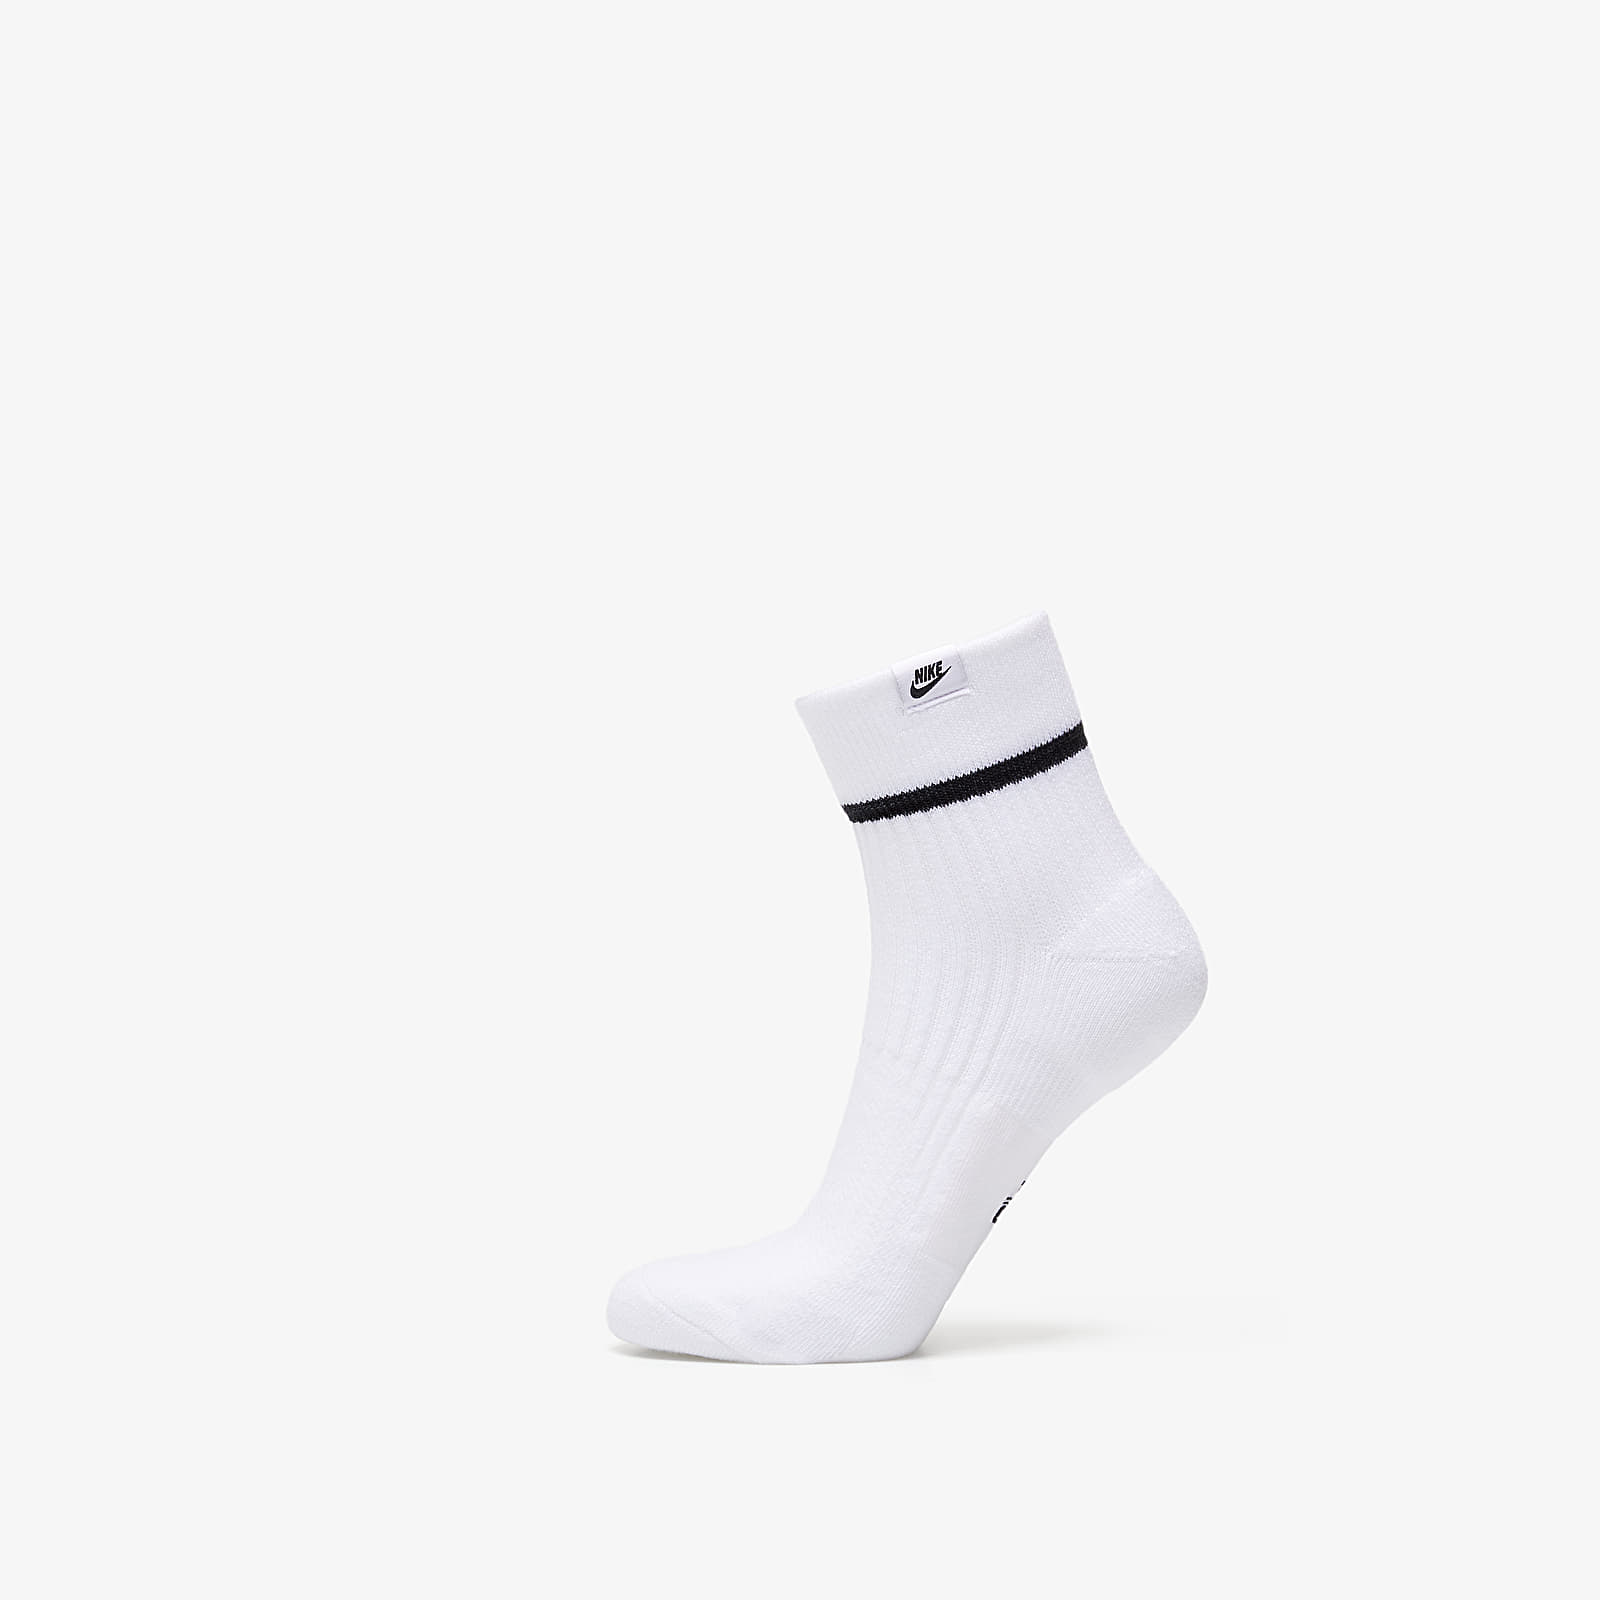 Chaussettes Nike Sneaker Essential Ankle Sox 2 Pair White/ Black/ Black